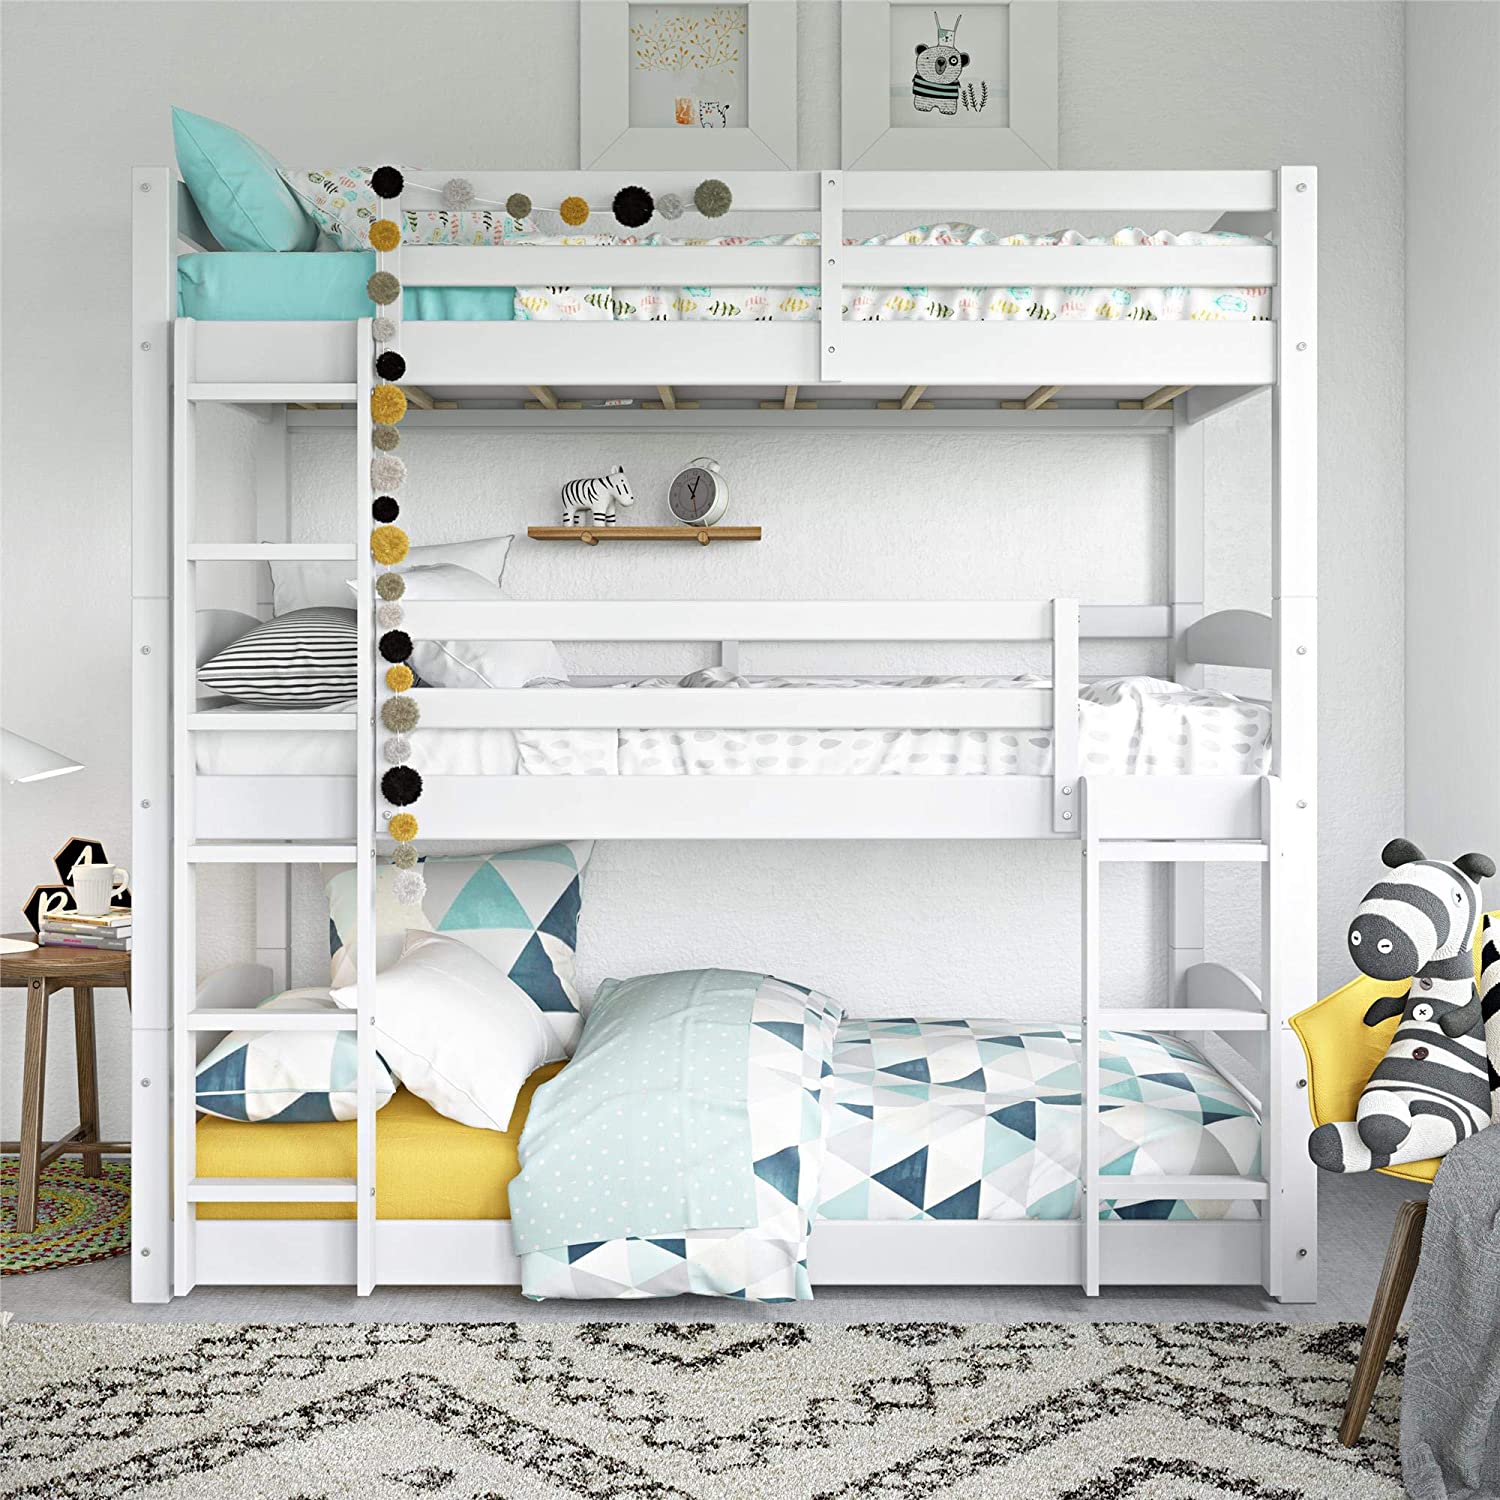 26 Bunk Beds You Ll Want For Yourself, Bunk Beds For Three Kids